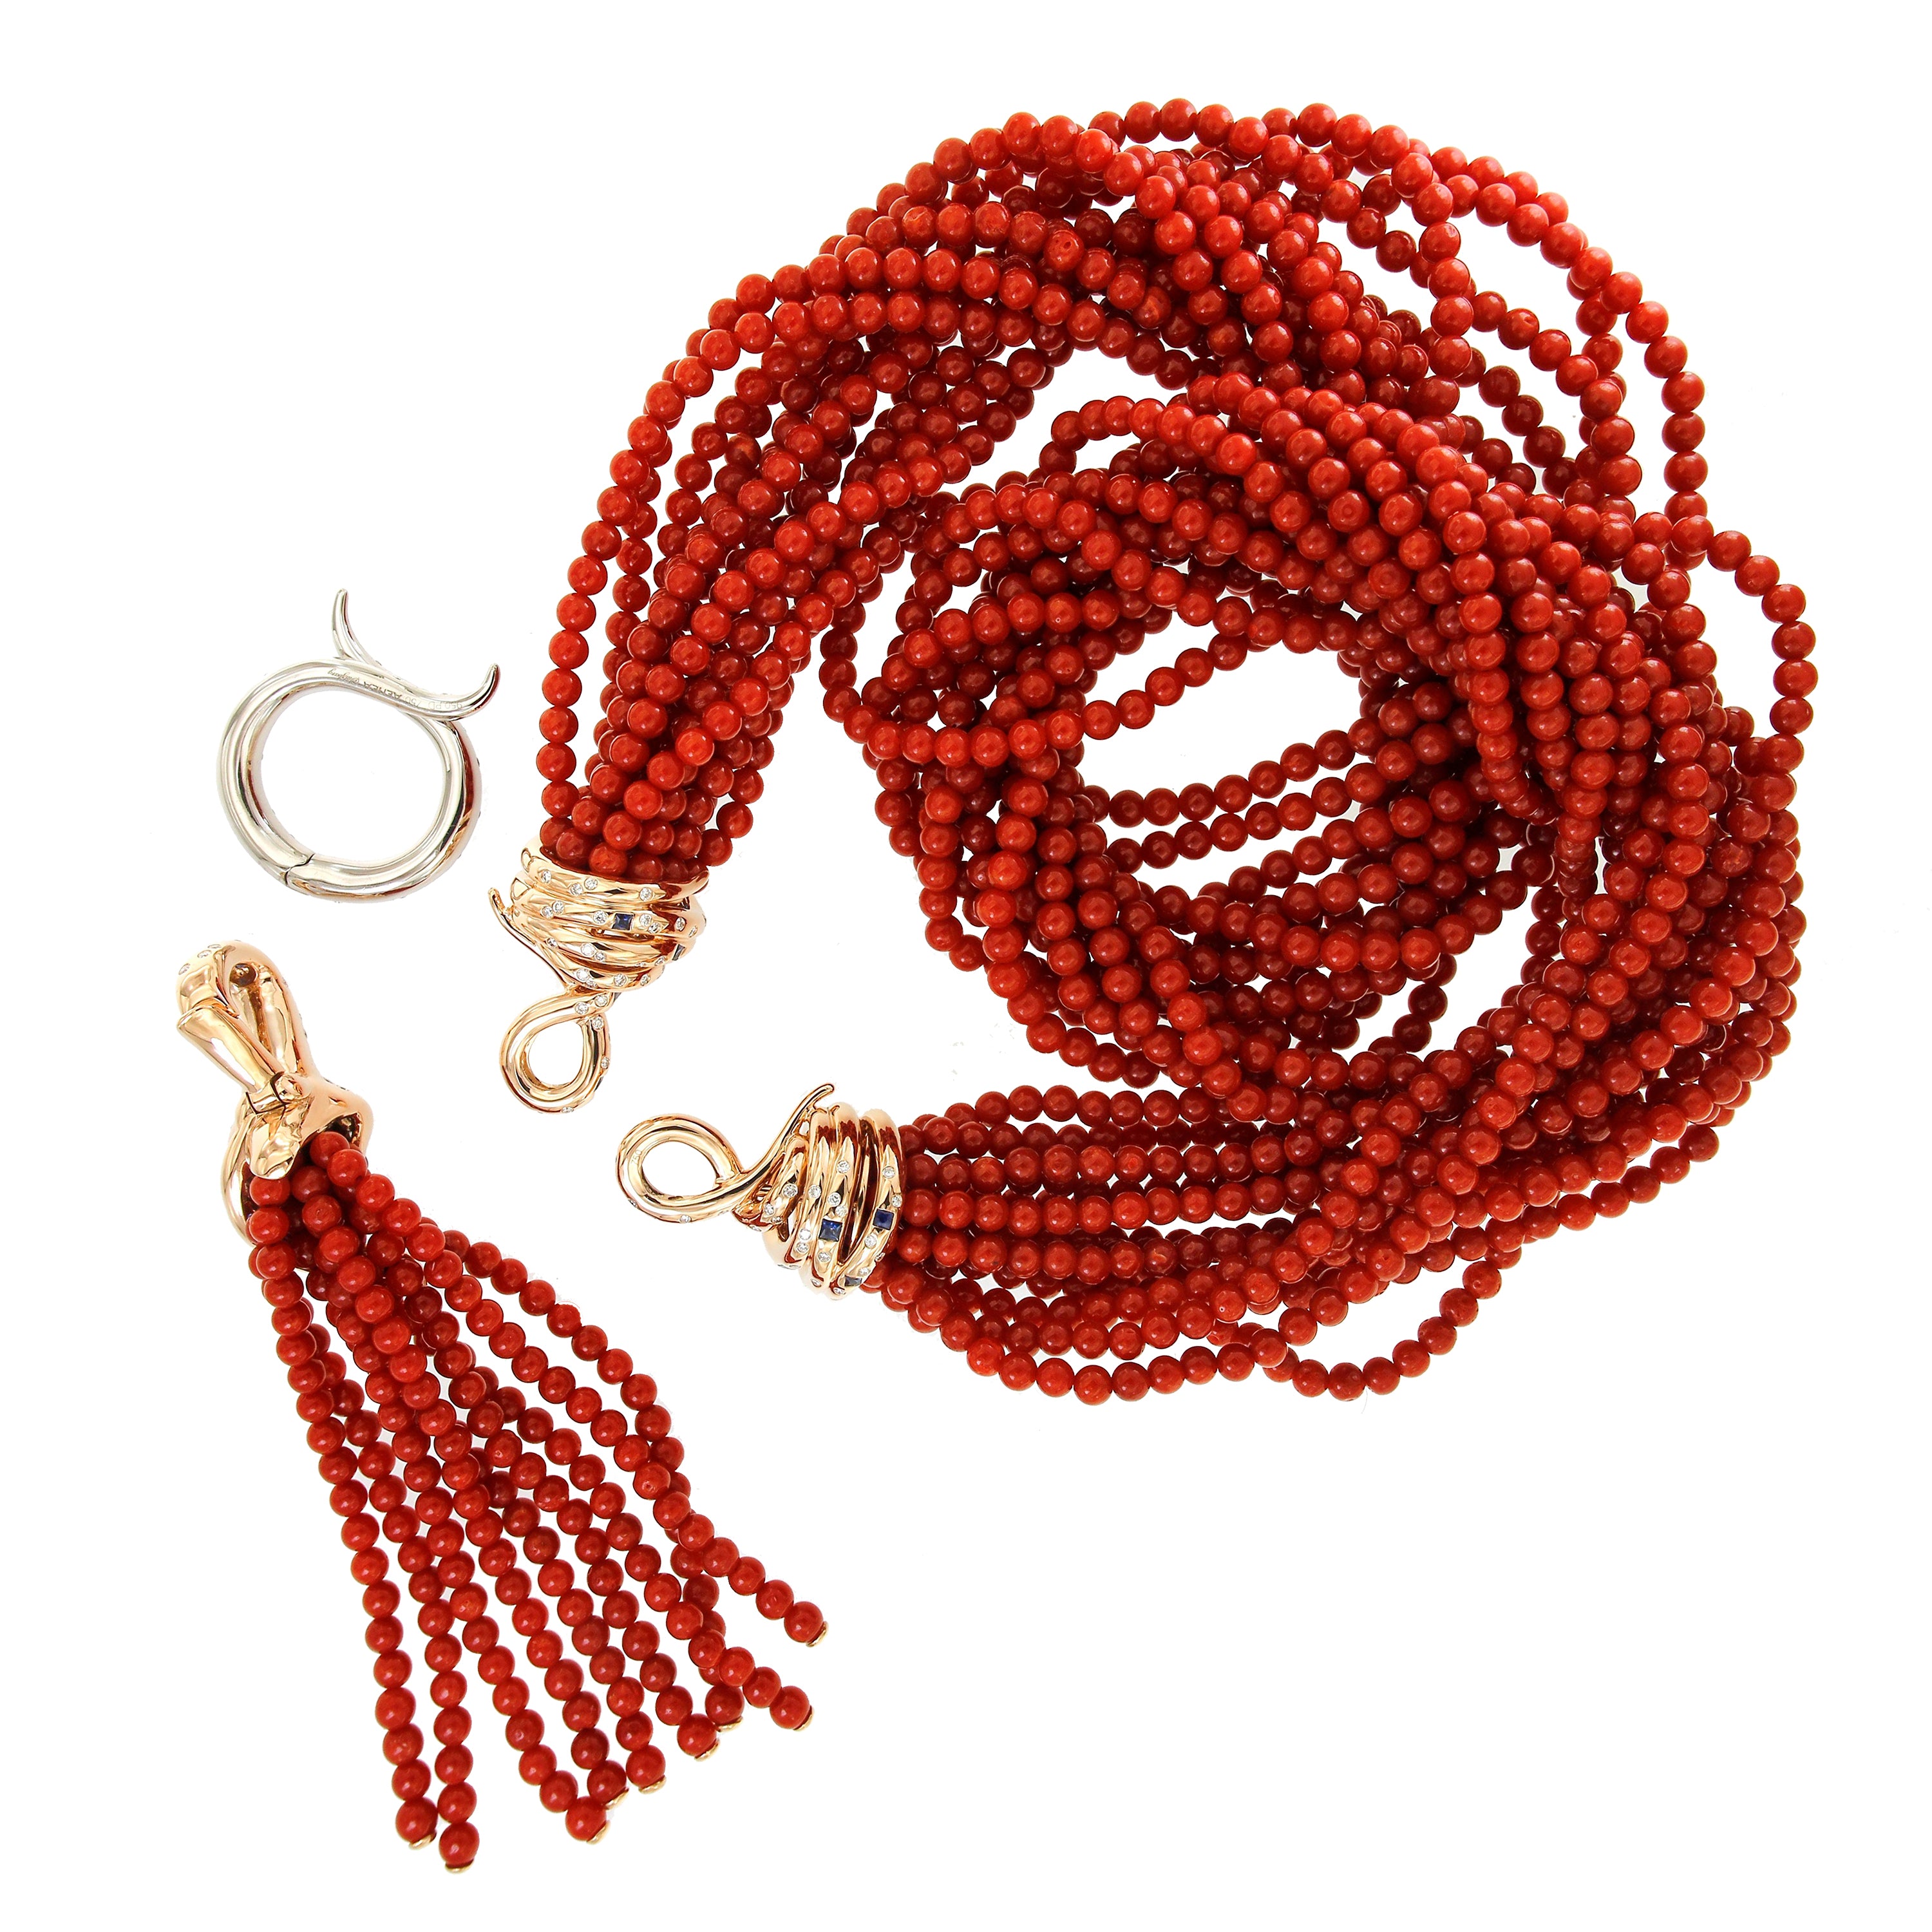 Necklace "Coral Tassle" Pink Gold with Corals